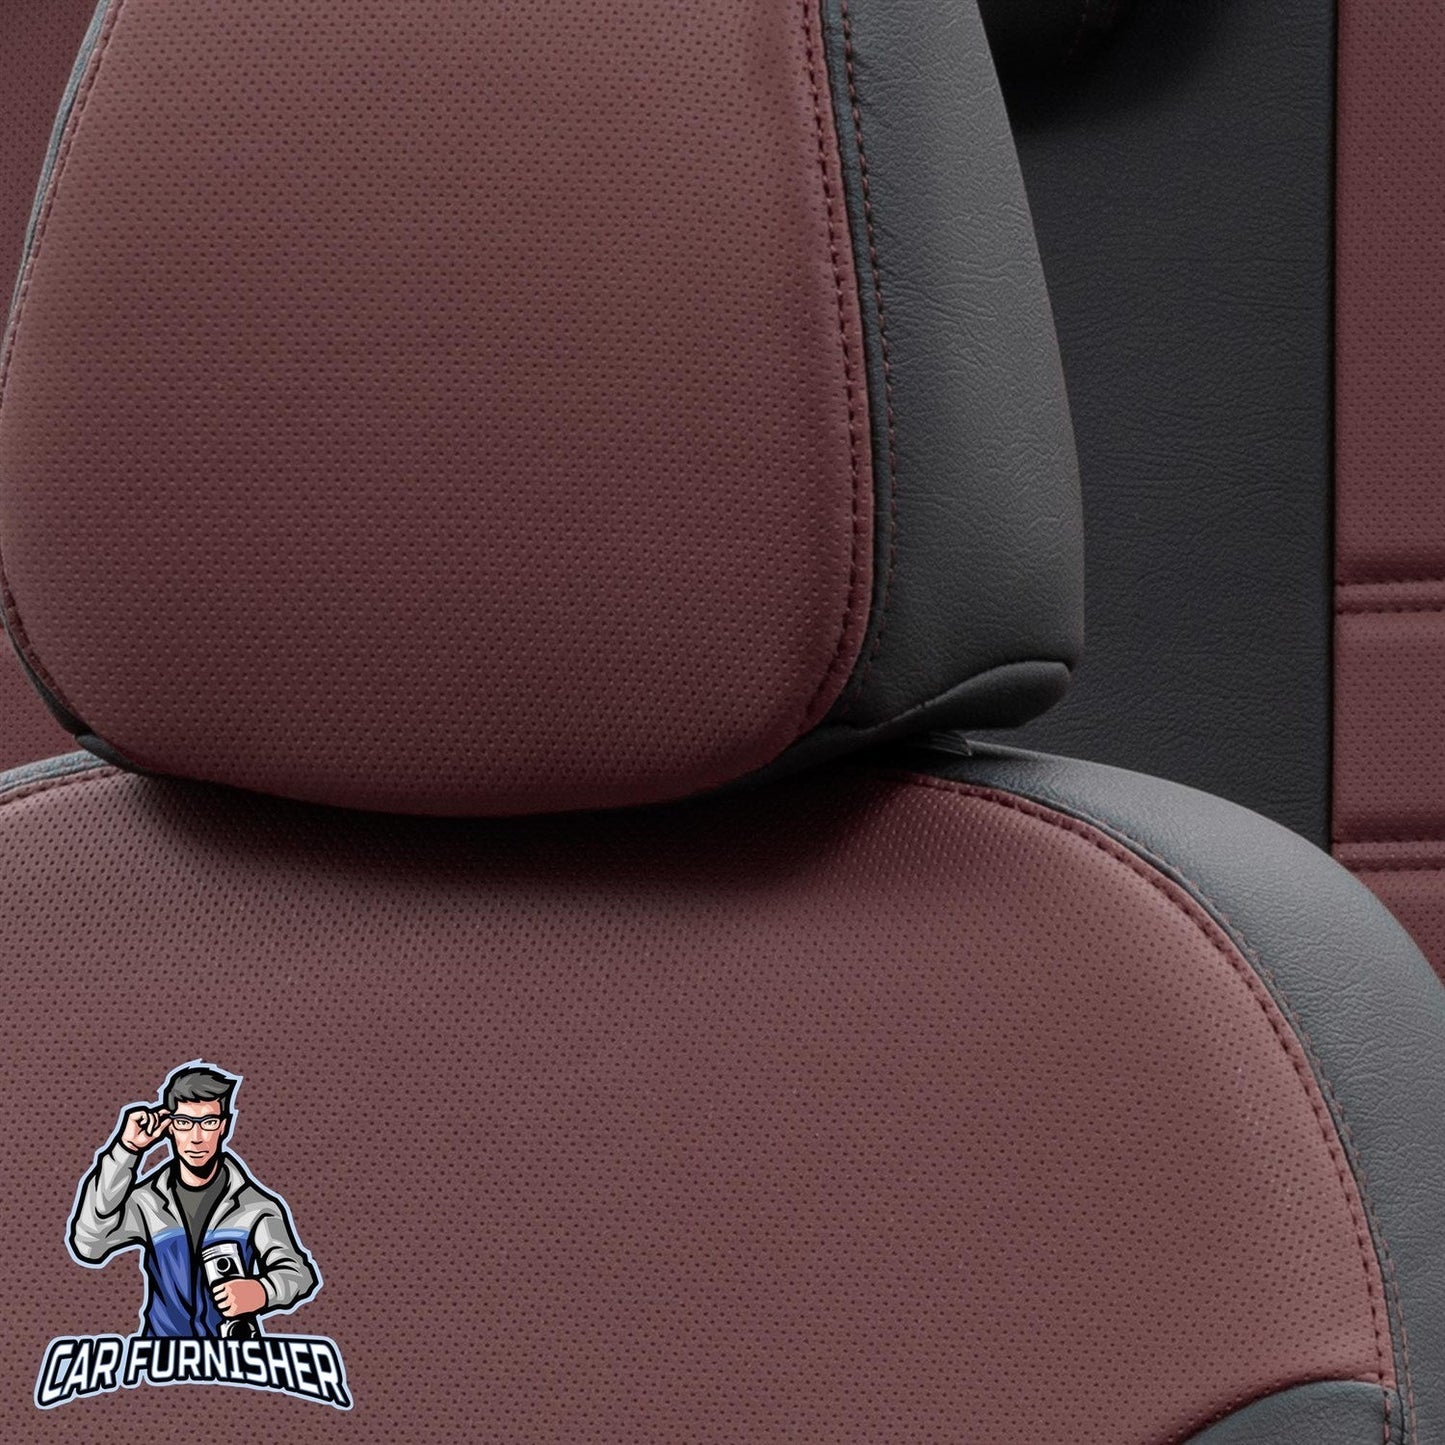 Renault Megane Seat Covers Istanbul Leather Design Burgundy Leather